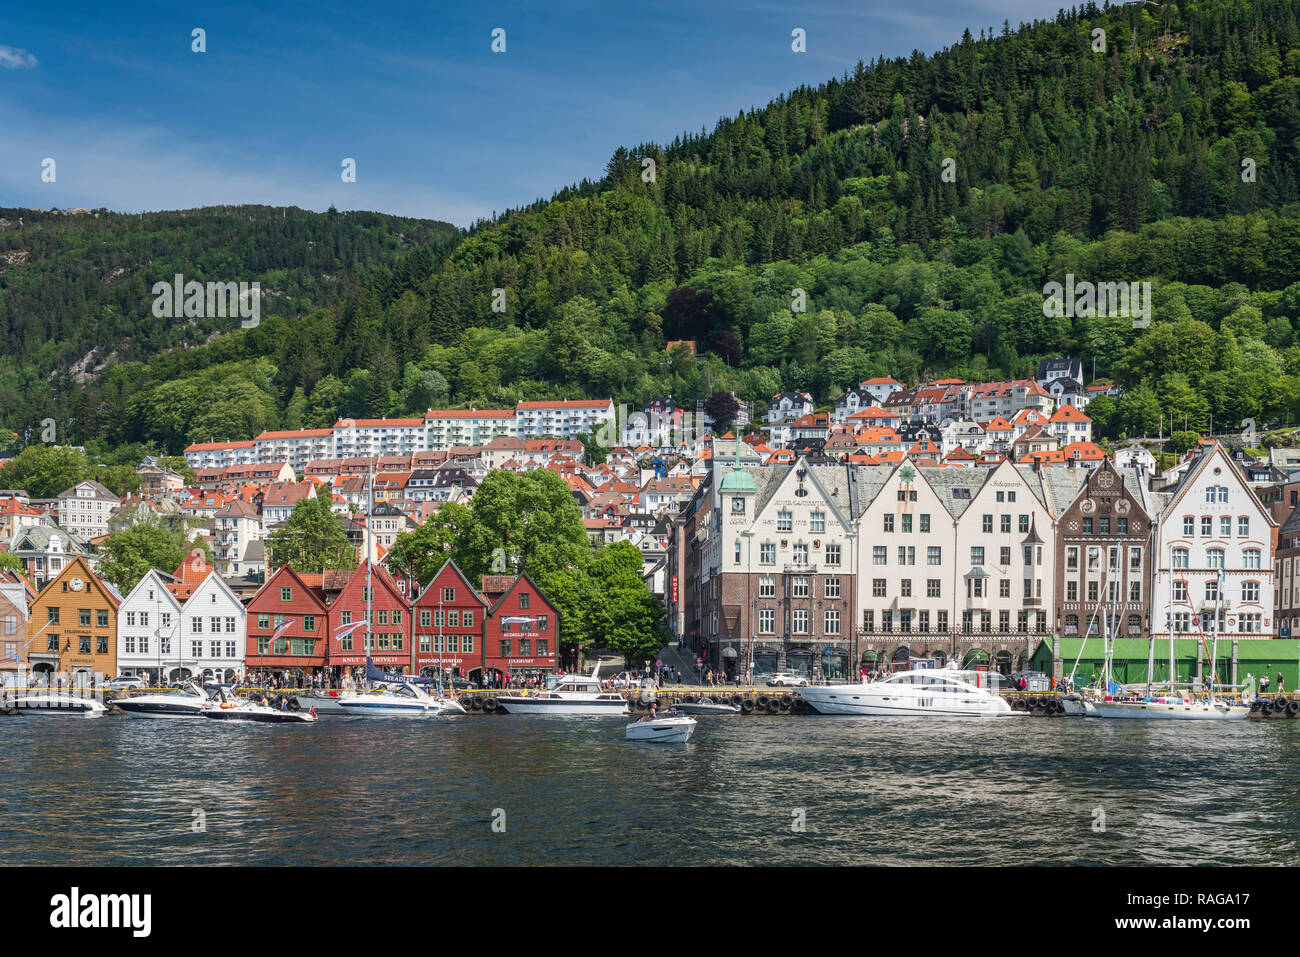 The wharf houses of Bryggen, are a series of Hanseatic commercial buildings lining the eastern side of the Vågen harbour in Bergen, Norway, Europe. Stock Photo